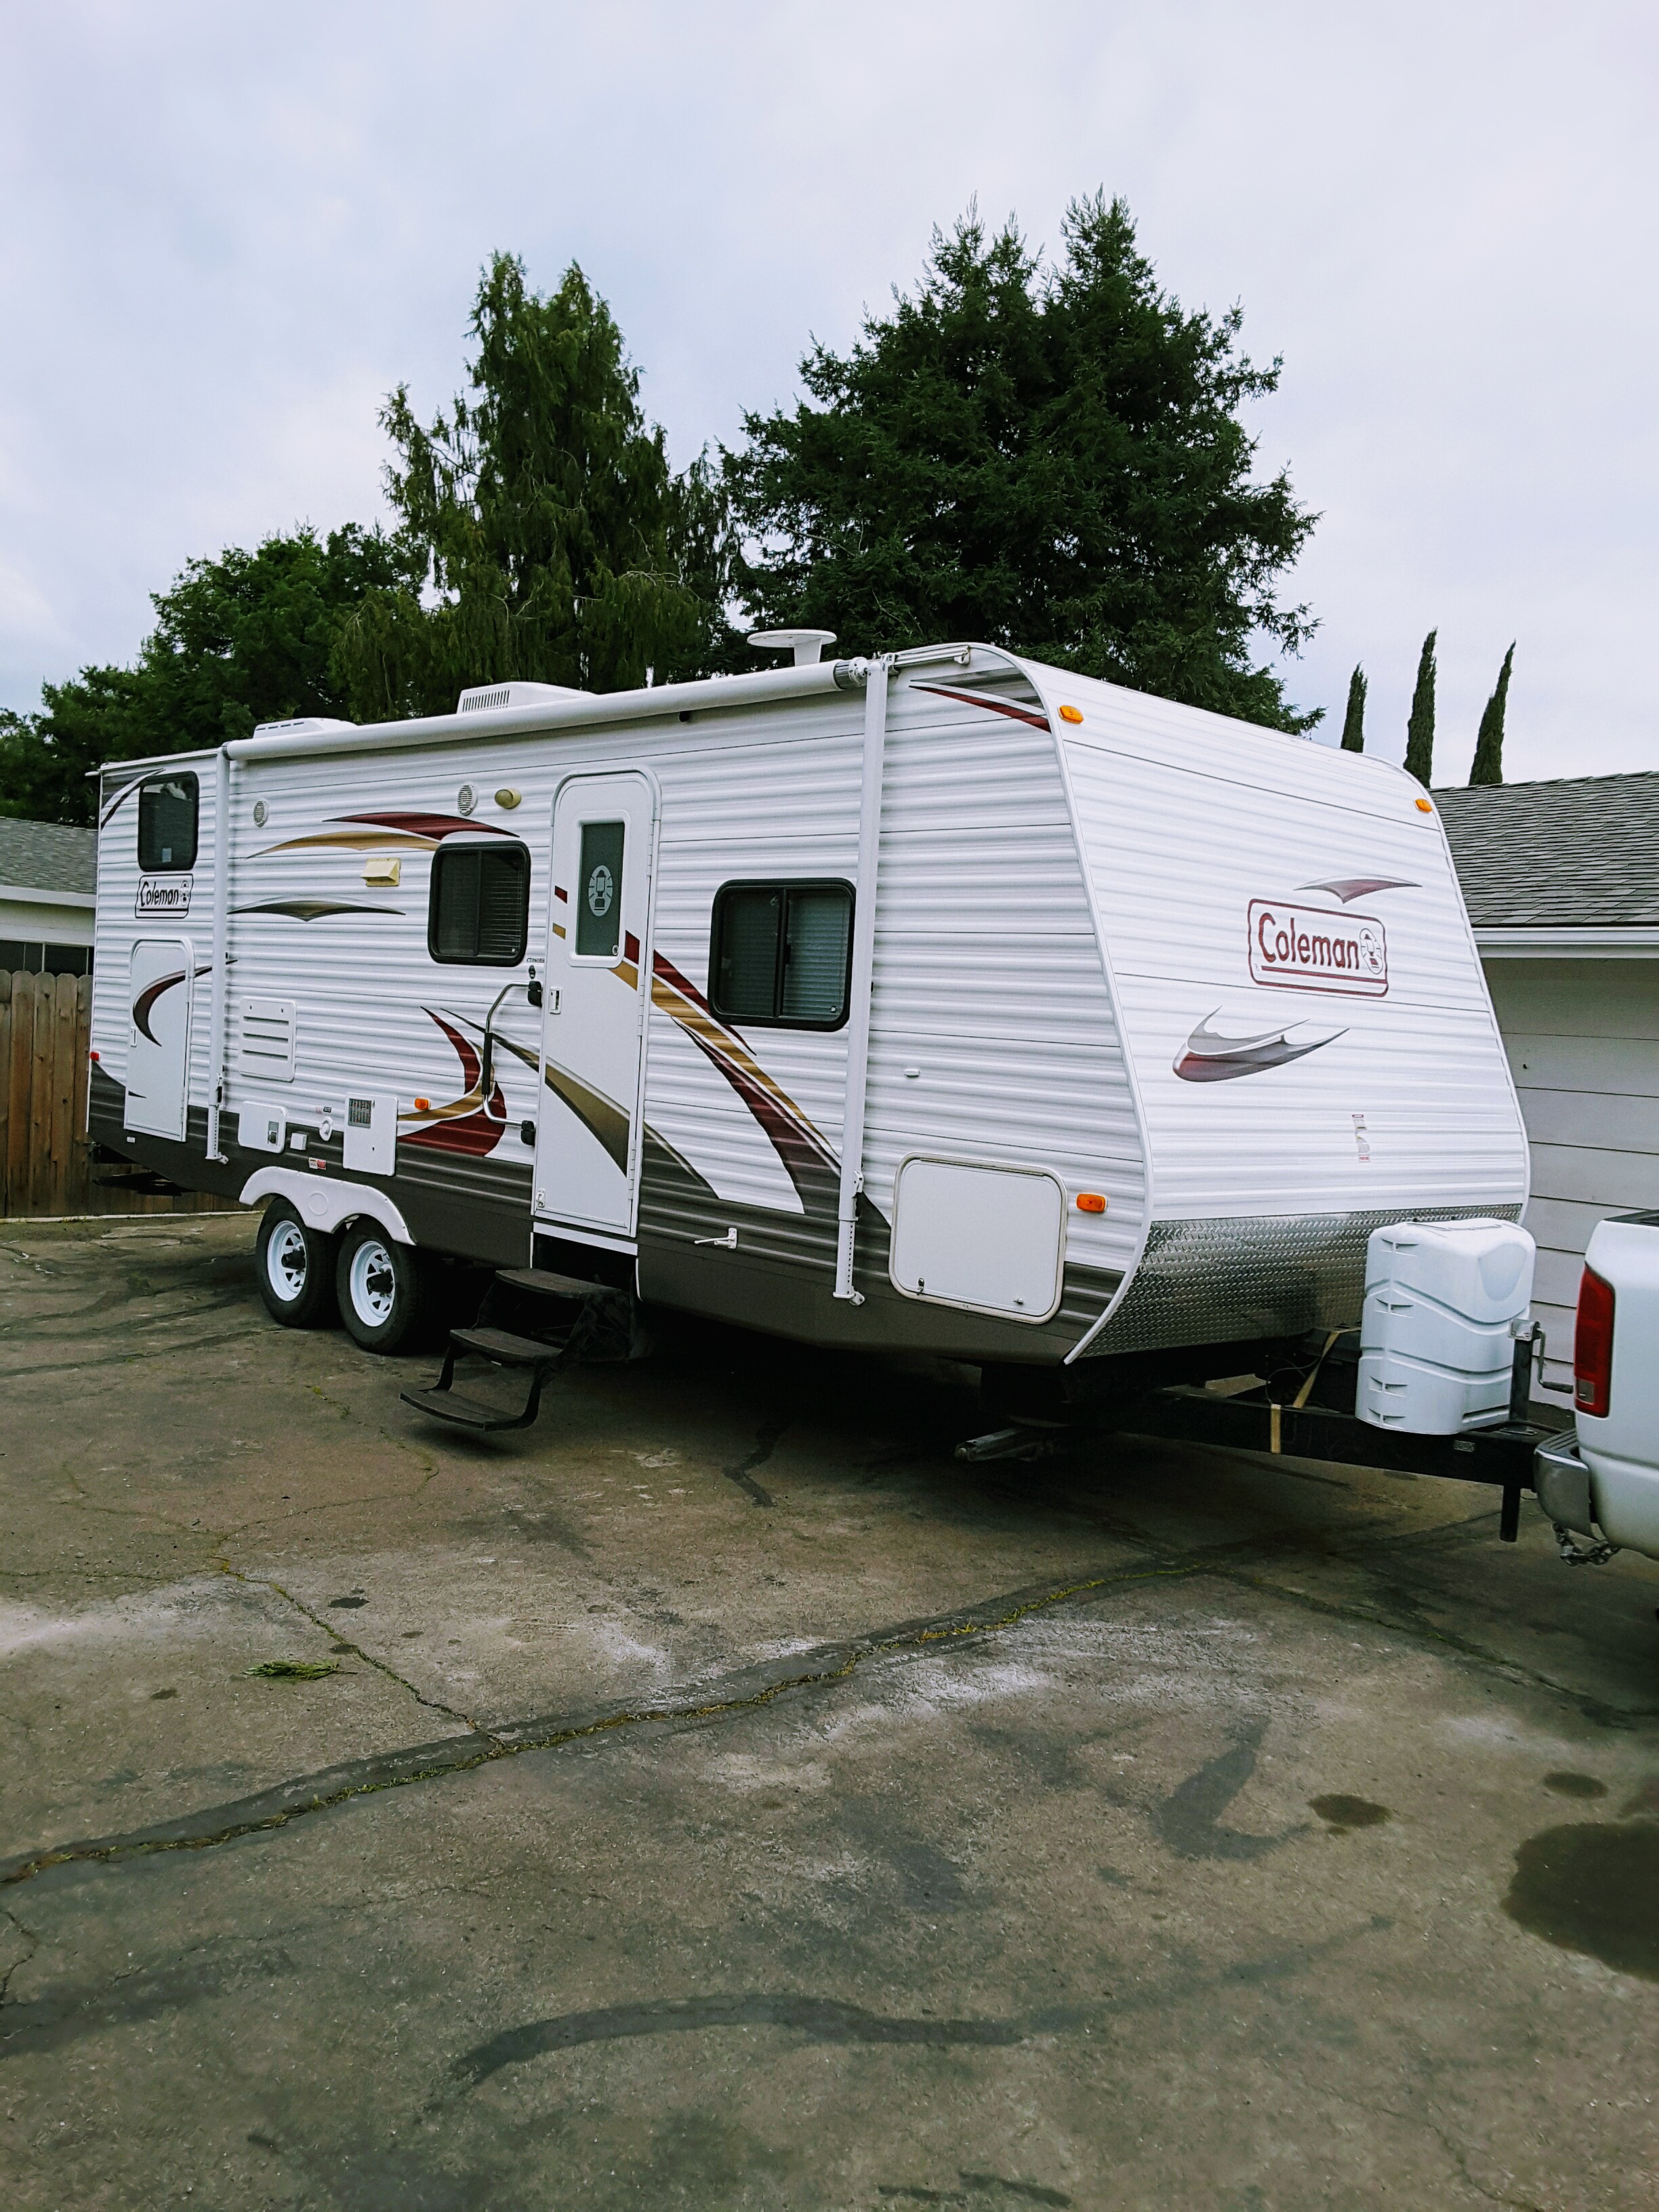 26 foot travel trailers for sale near me